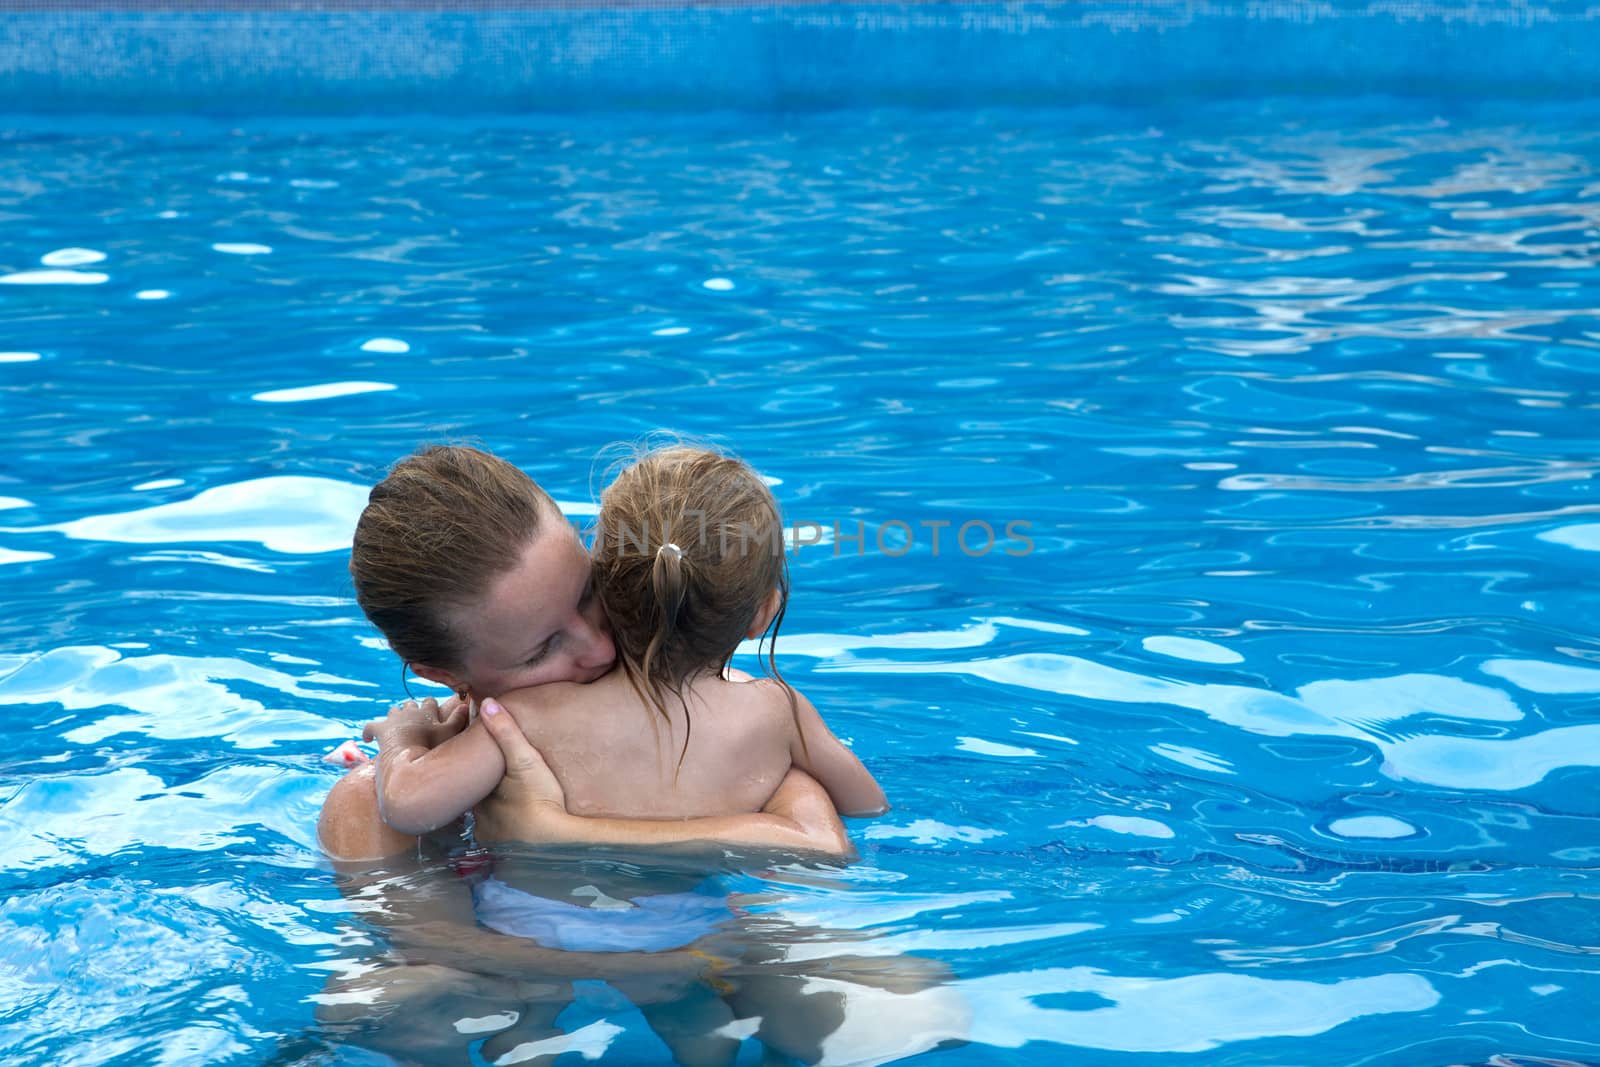 Mother and daughter cuddling in the pool with copy space on the right